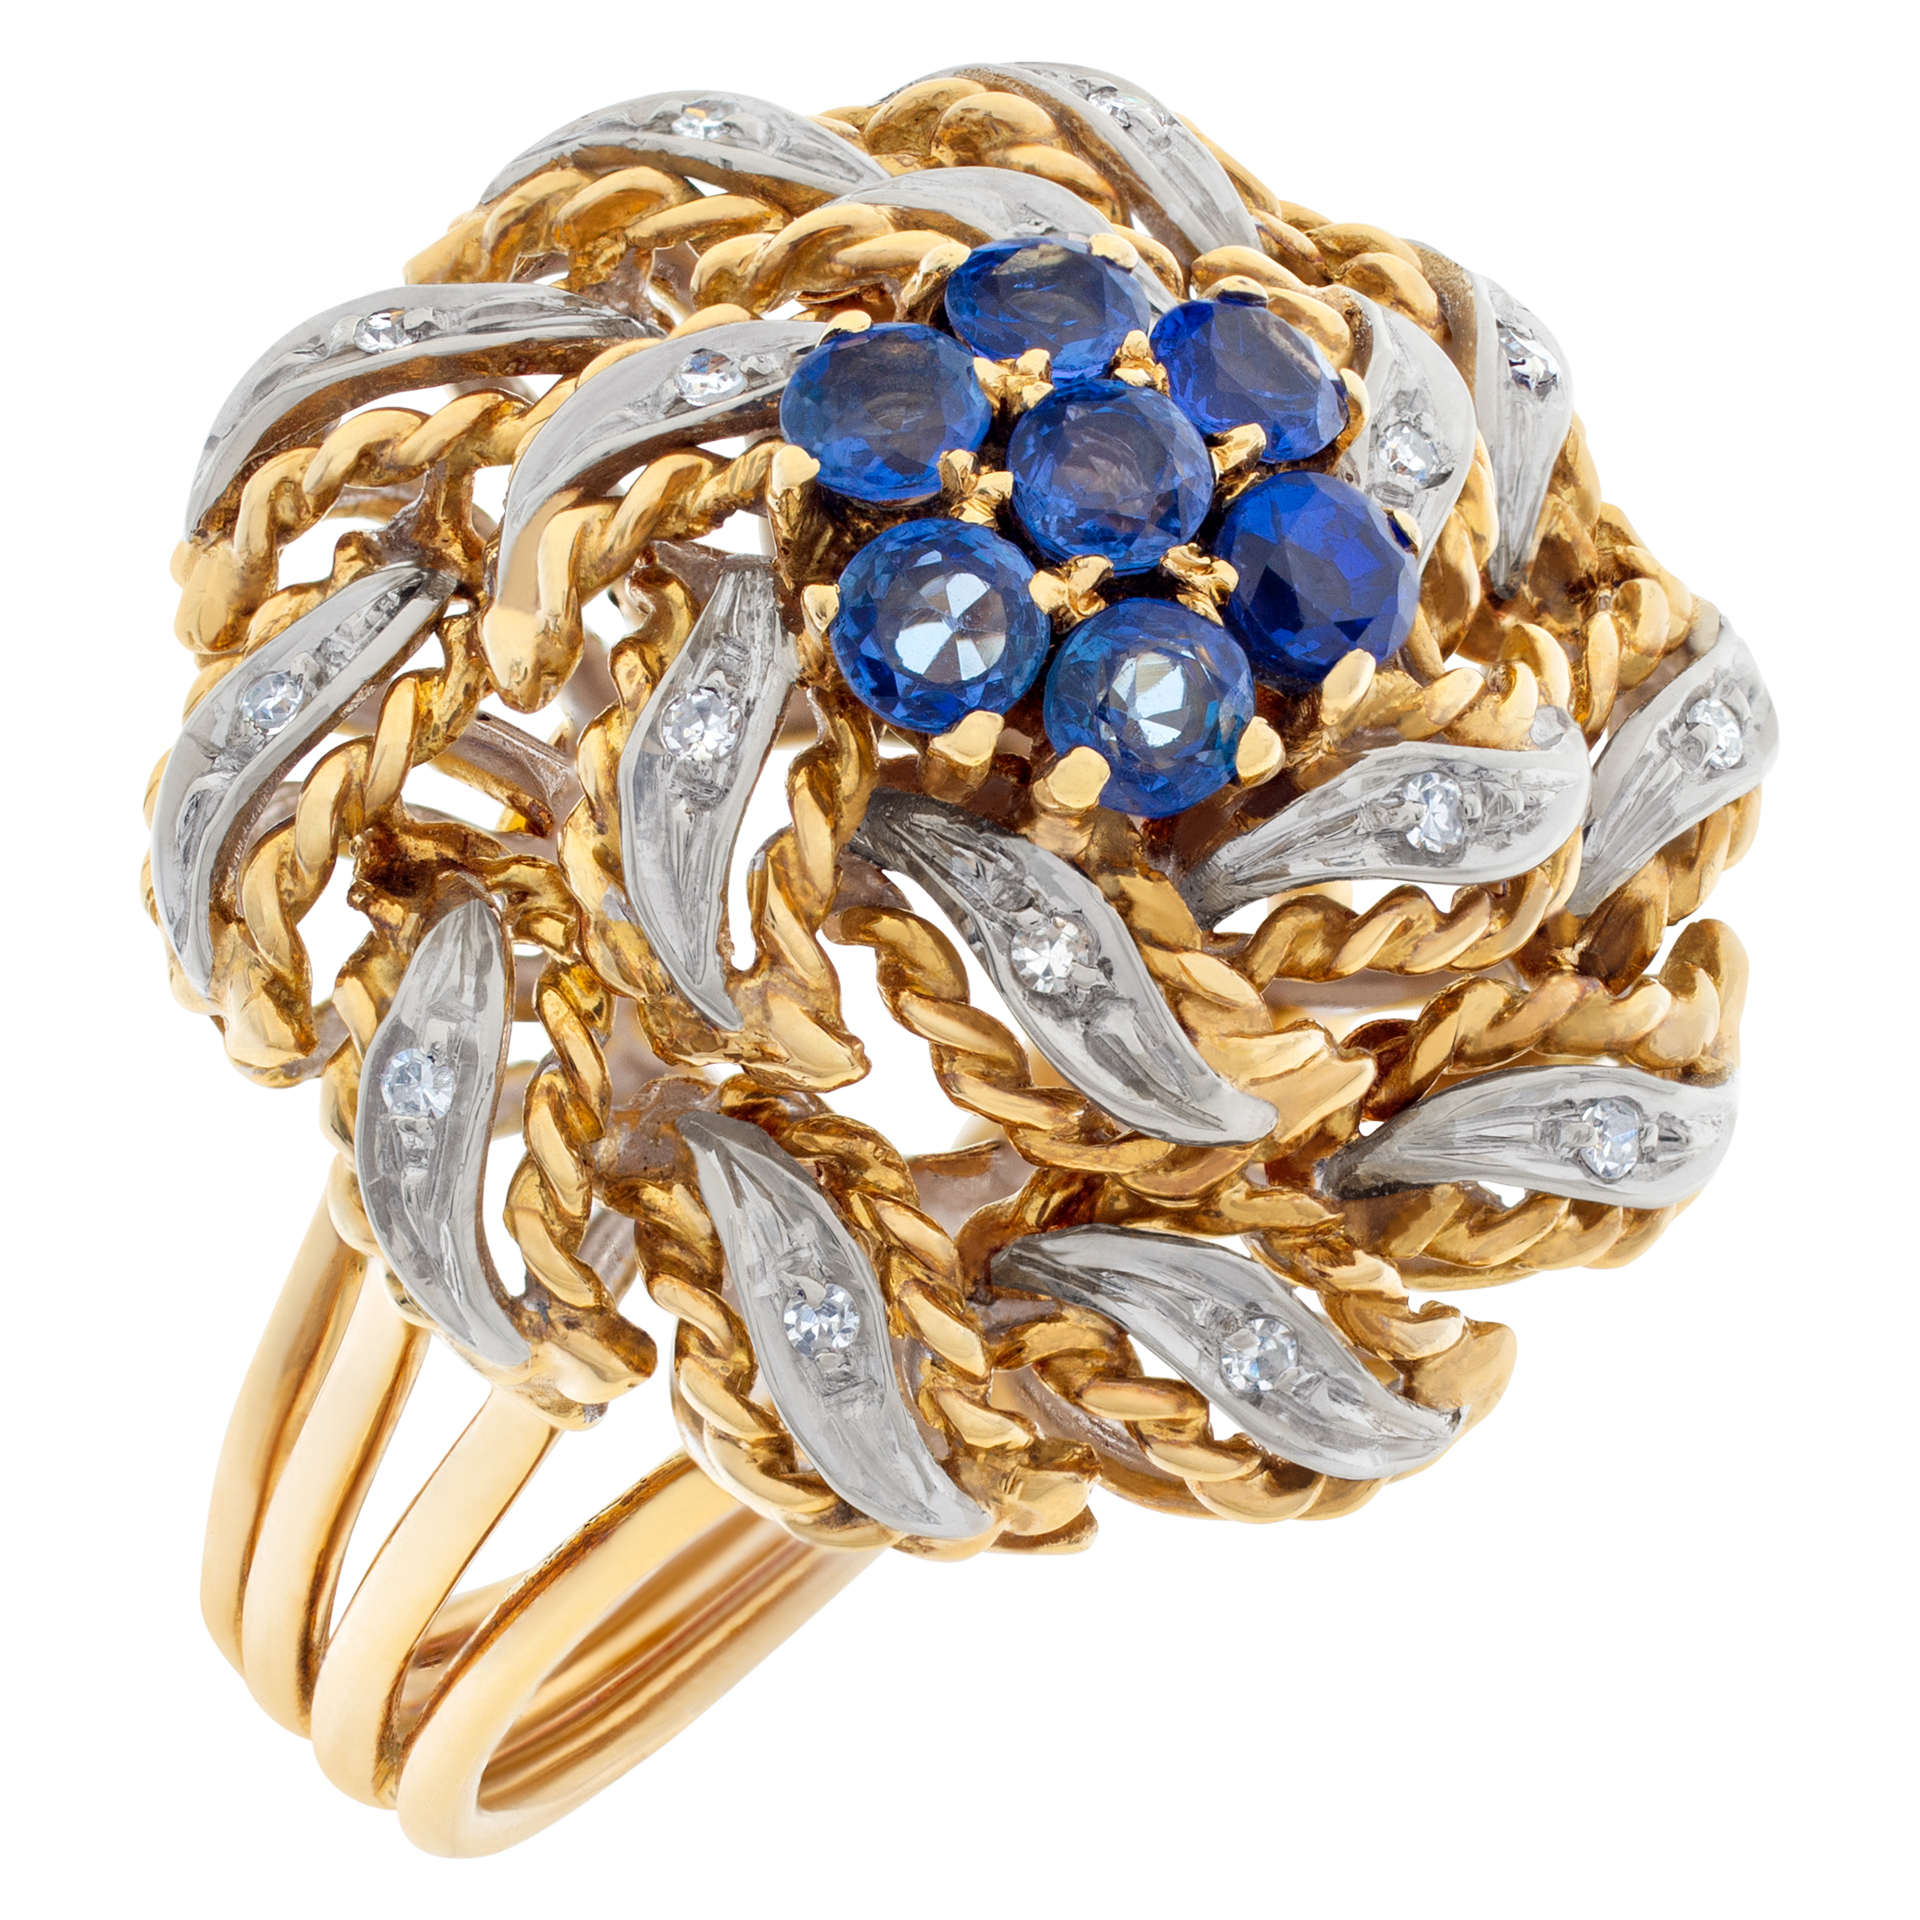 VIntage circa 1980's, Diamonds & Sapphire cocktail ring set in 18k white and yellow gold. image 3